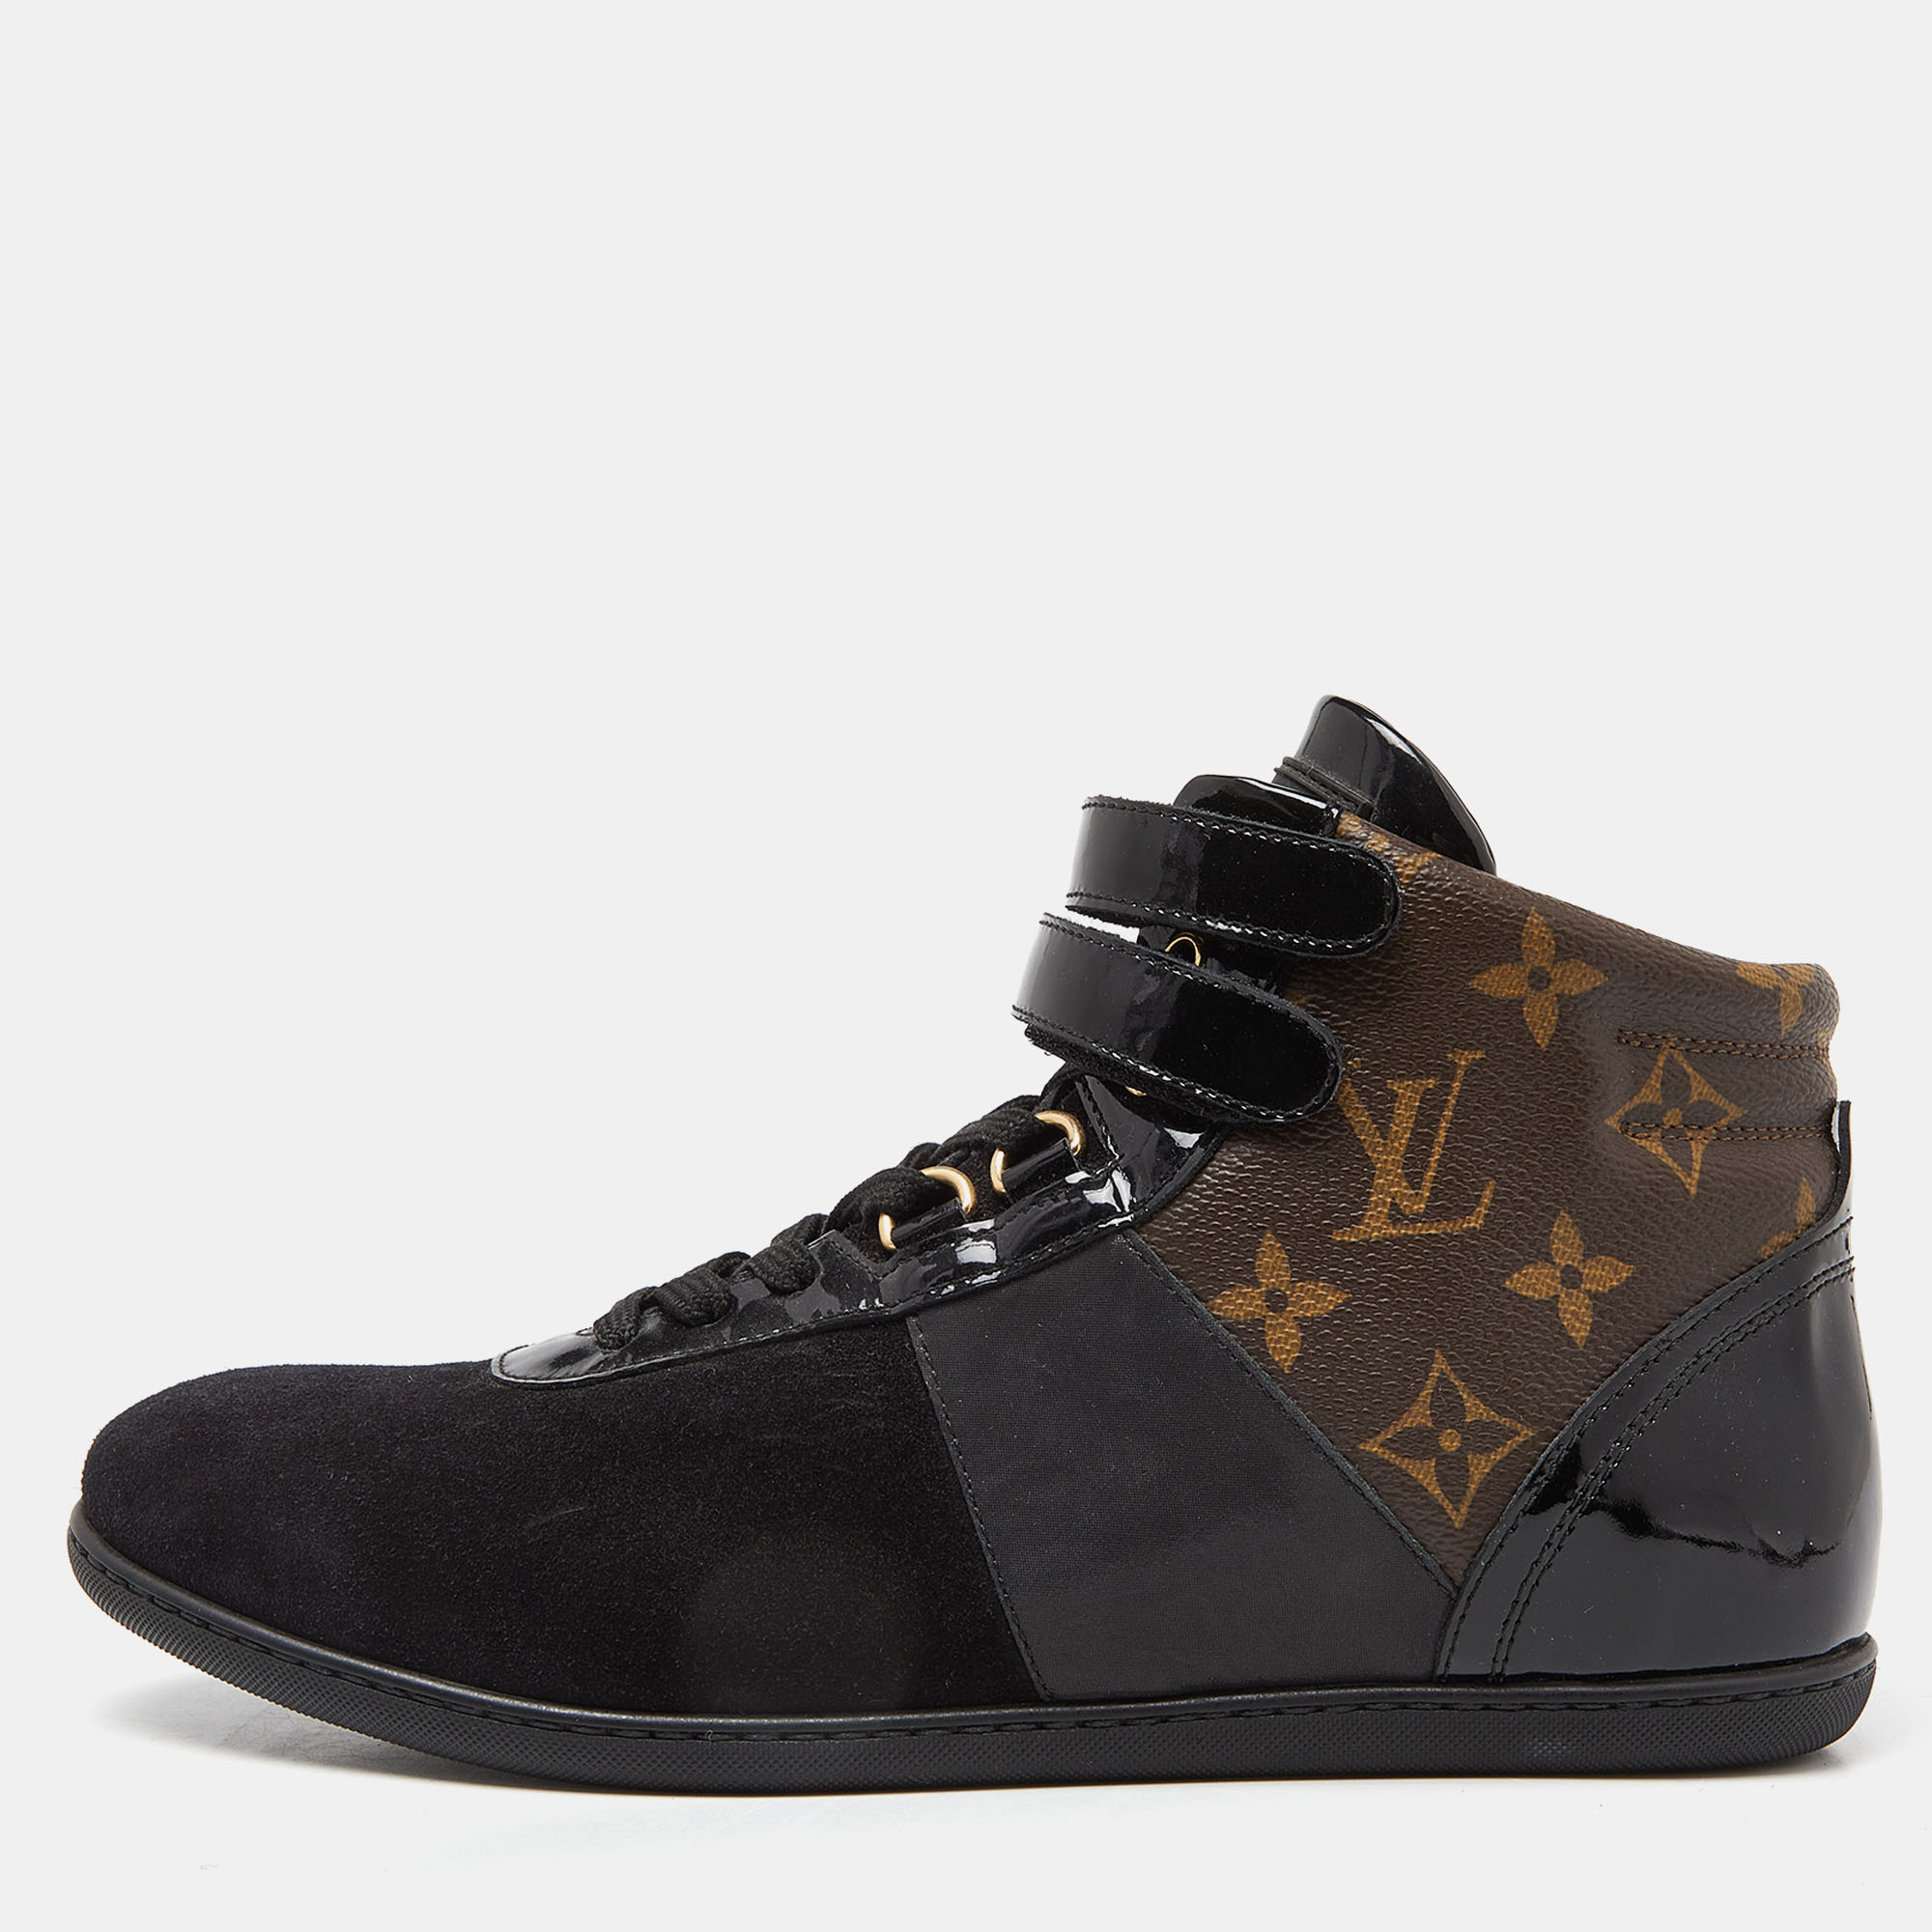 Louis vuitton black/brown suede, patent leather and monogram canvas move up sneakers size 38